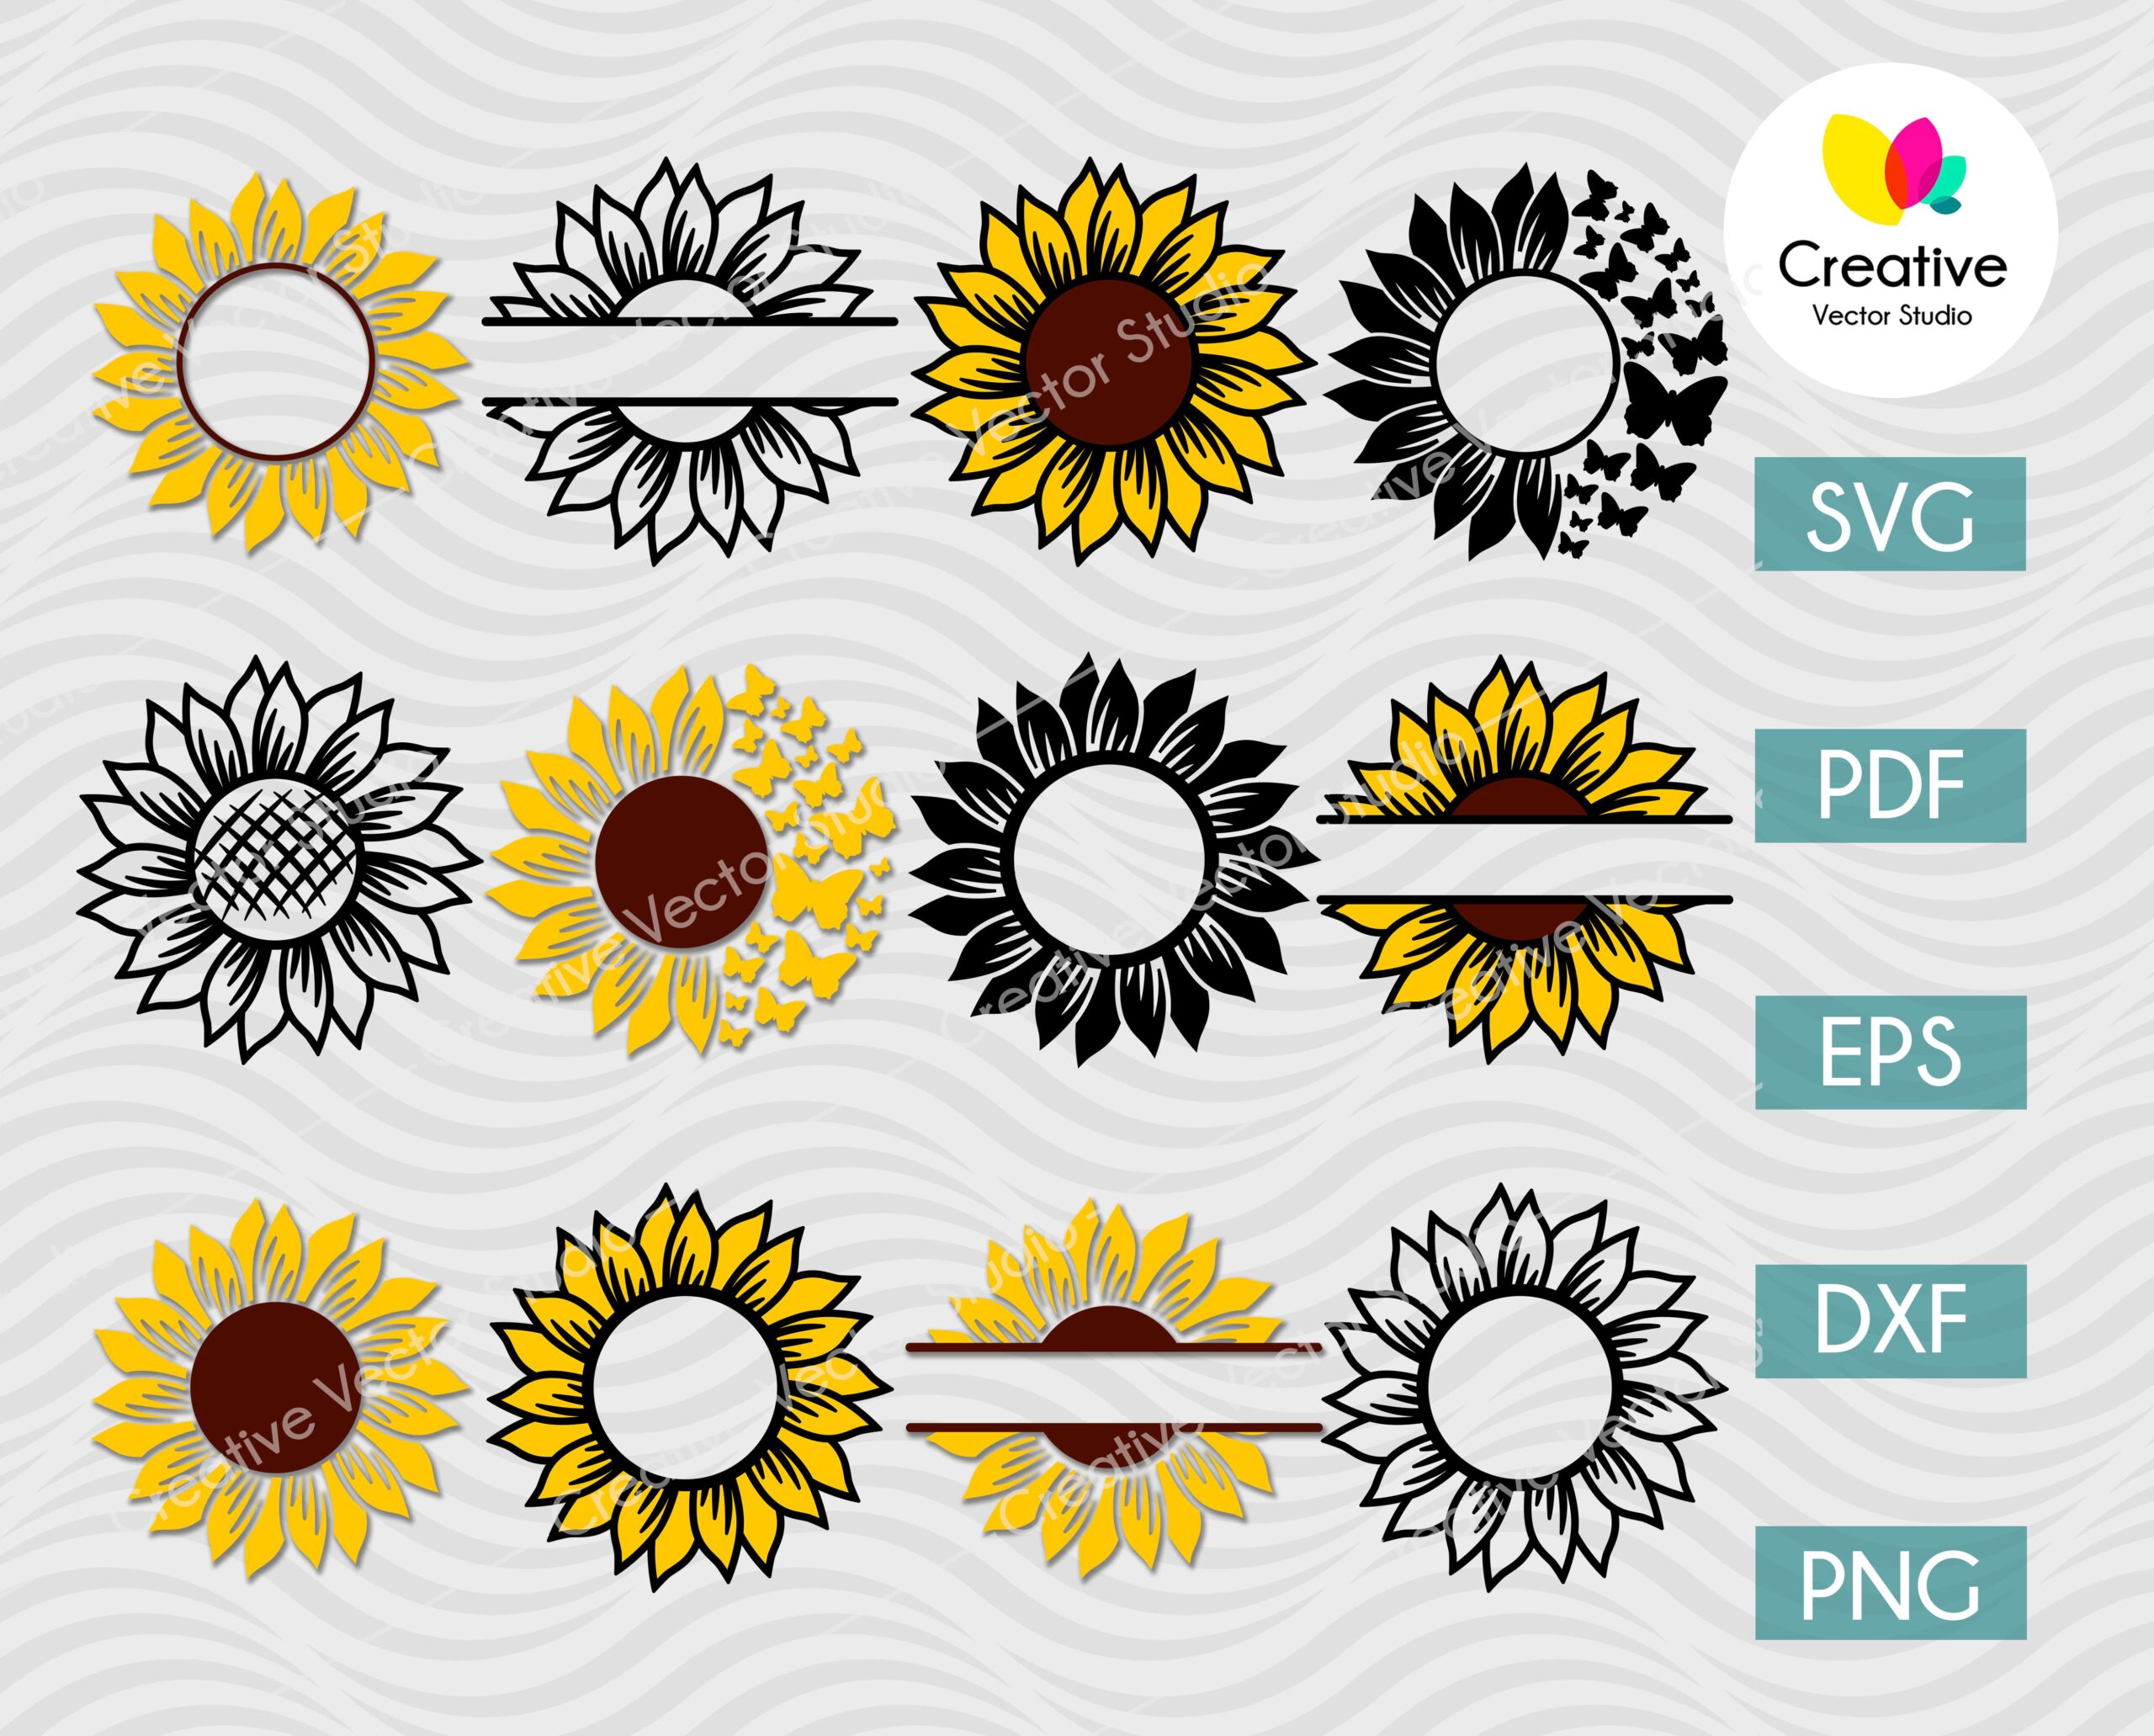 Starbucks Cup Monogram Sunflower SVG, DXF, PNG, EPS, Cut Files